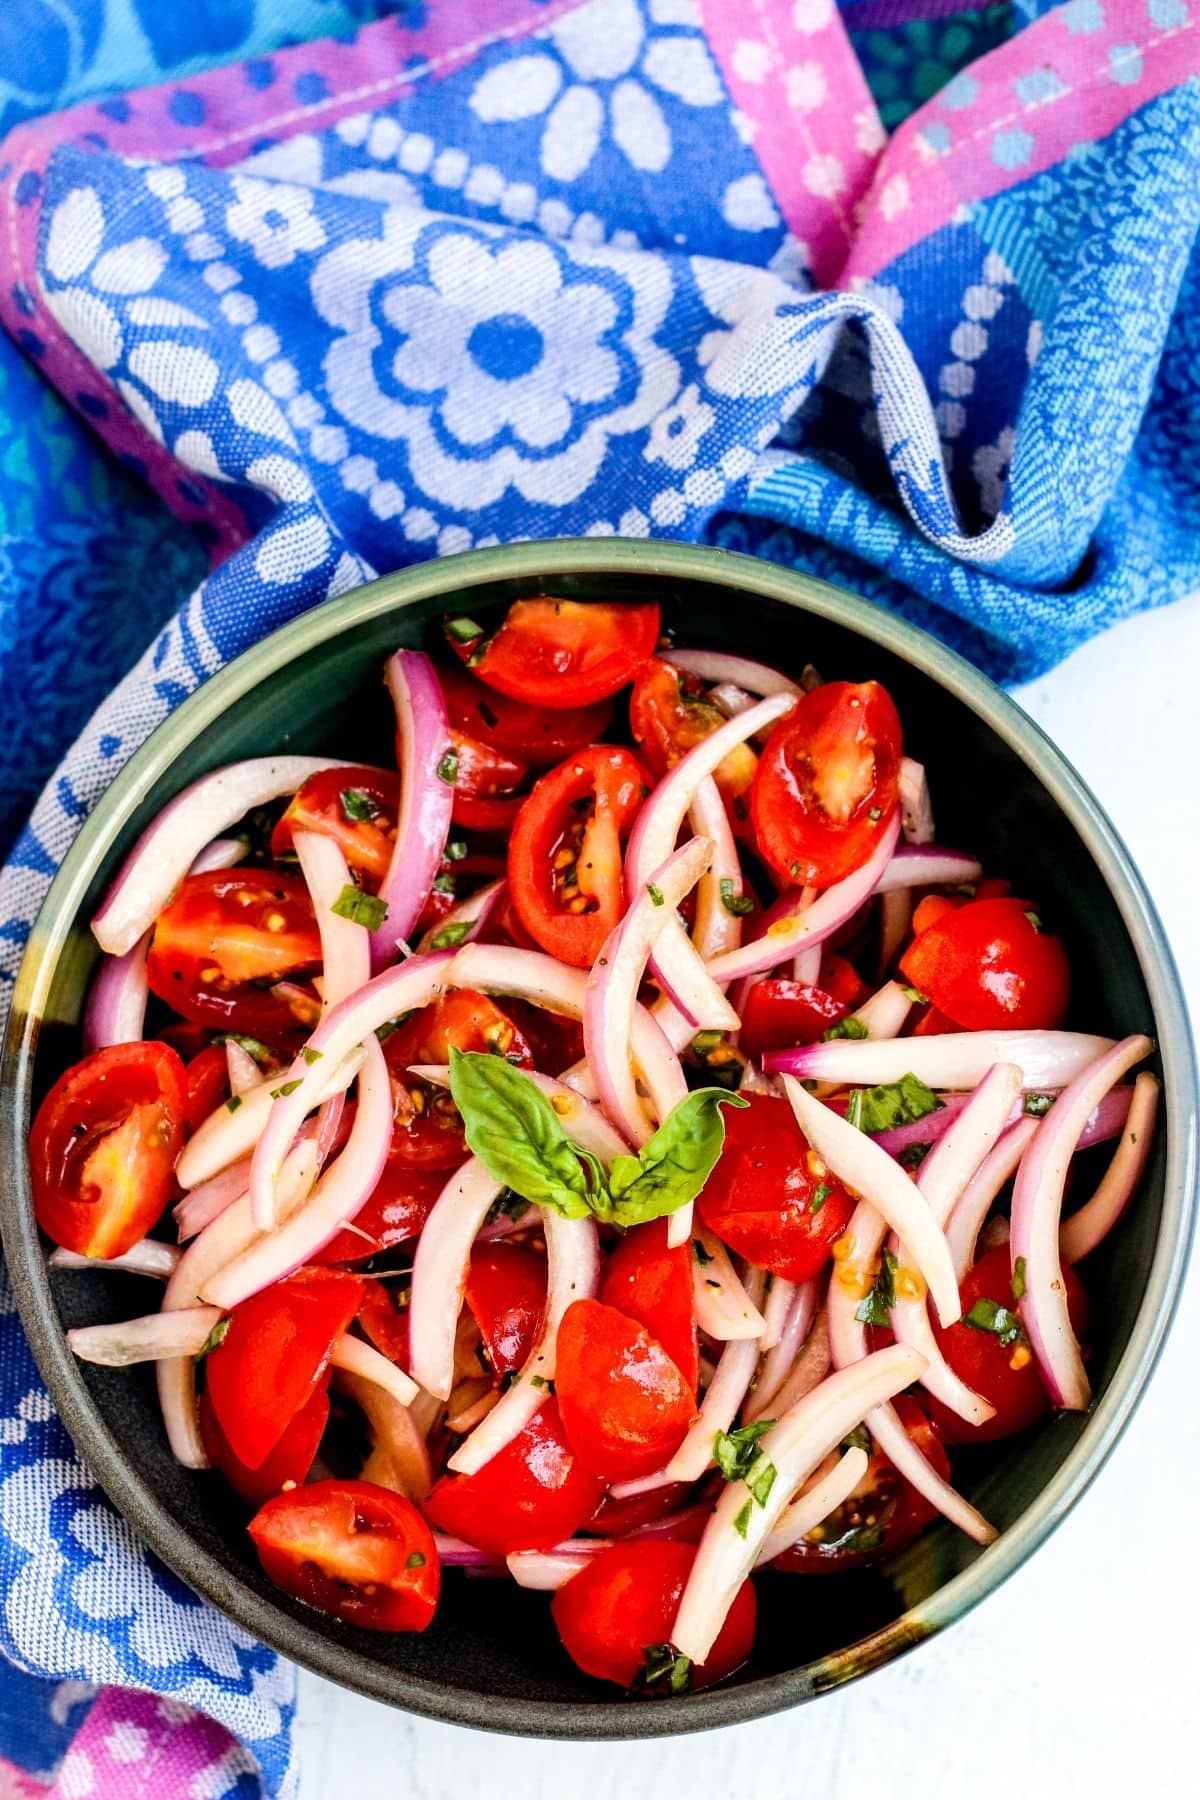 Bowl of tomato and red onion salad next to a purple and blue napkin